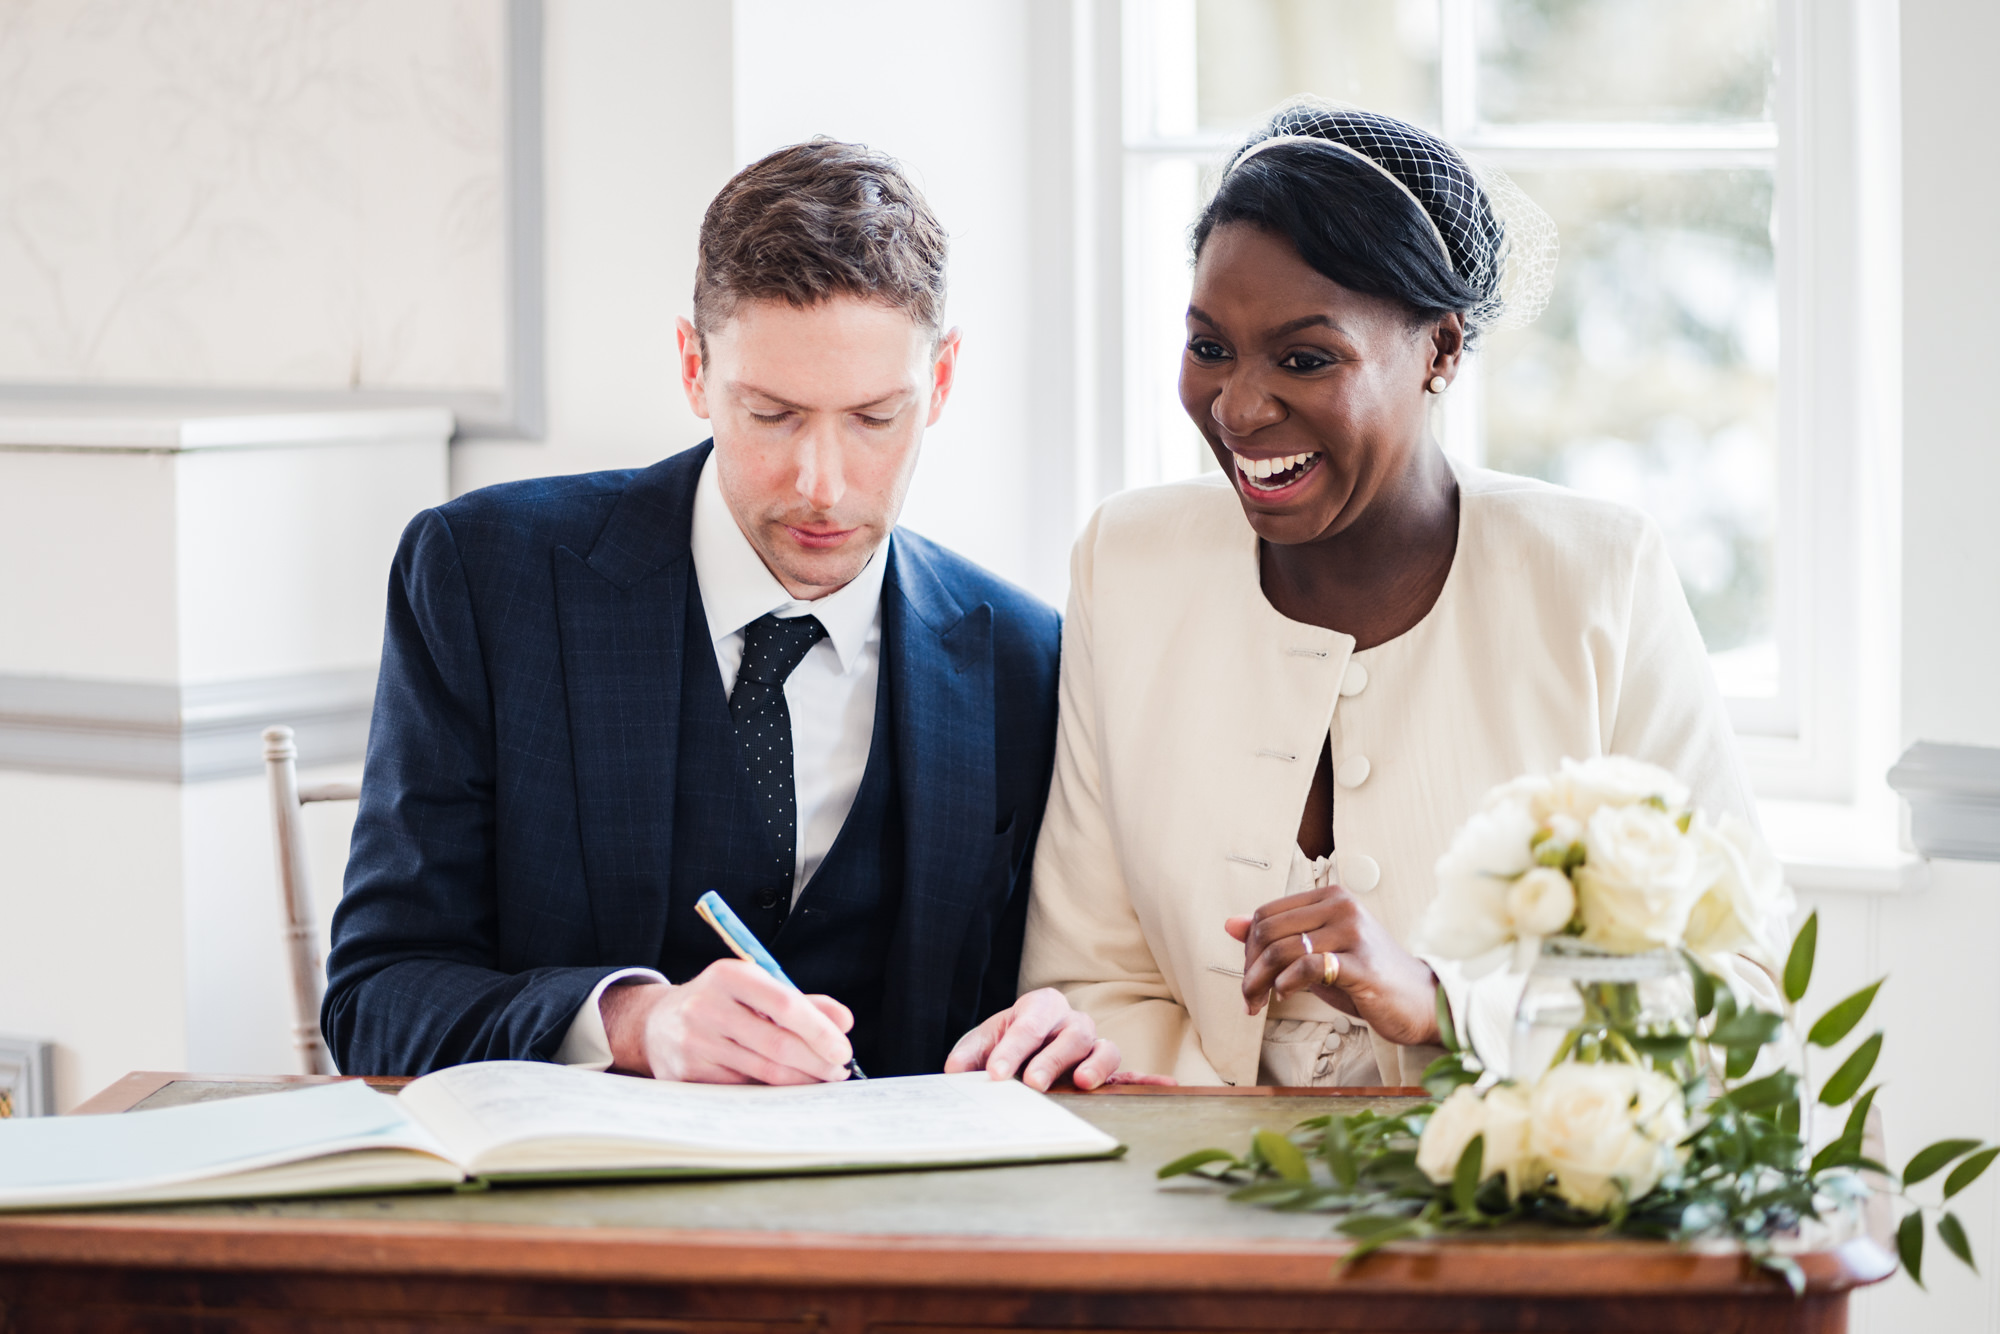 happy bride smiles in delight as groom signs wedding register during their wedding ceremony